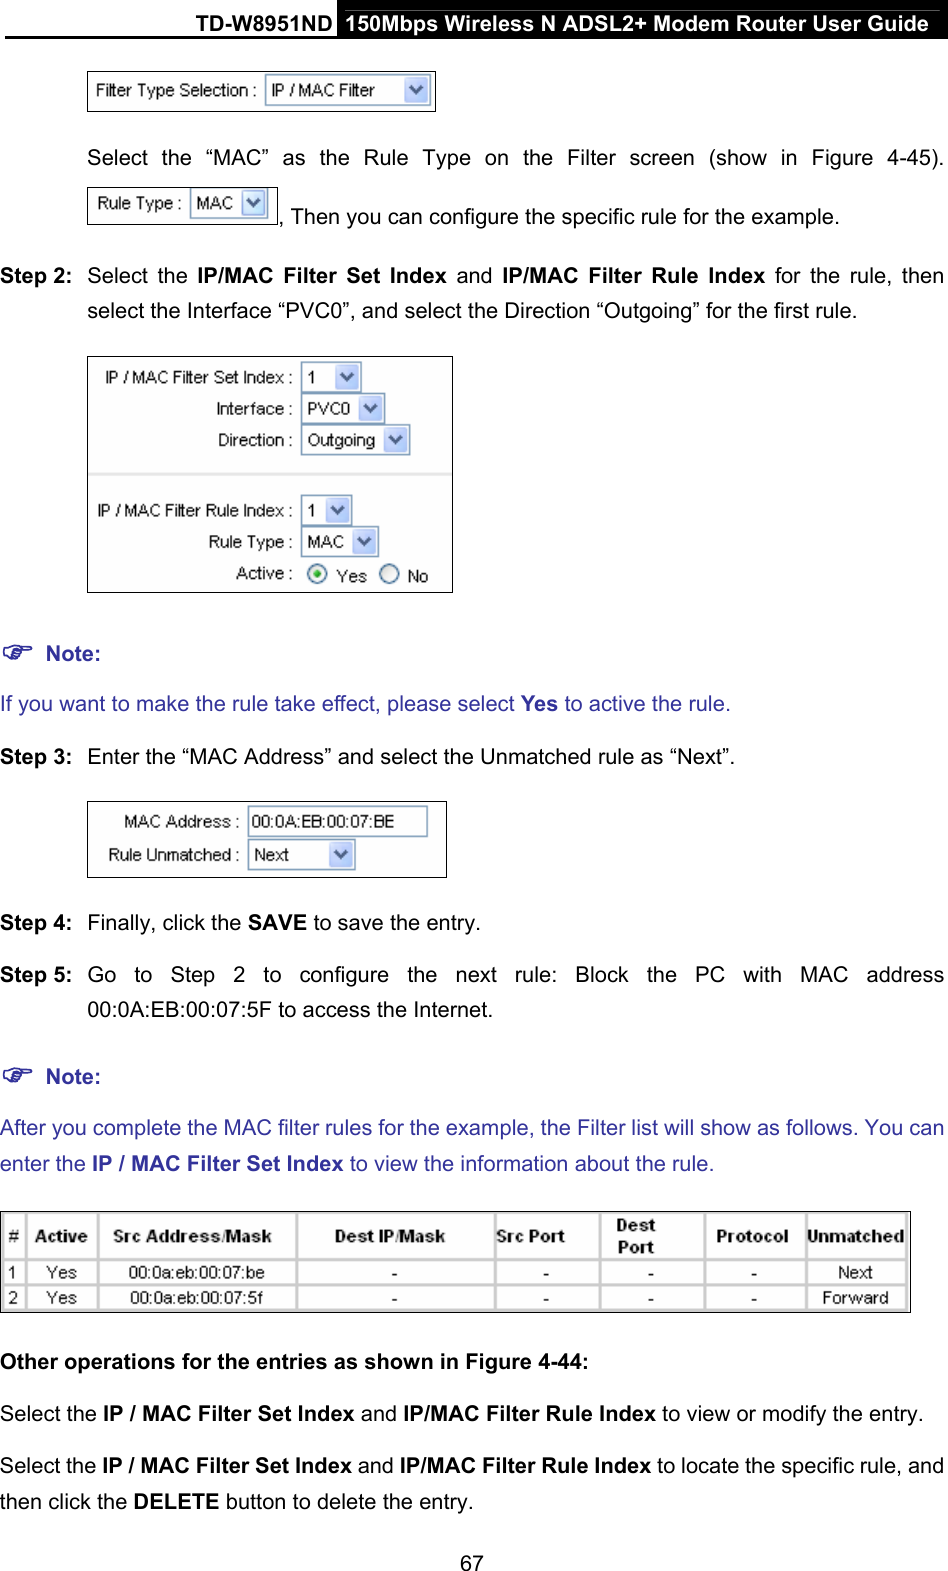 TD-W8951ND  150Mbps Wireless N ADSL2+ Modem Router User Guide  Select the “MAC” as the Rule Type on the Filter screen (show in Figure 4-45). , Then you can configure the specific rule for the example. Step 2:  Select the IP/MAC Filter Set Index and IP/MAC Filter Rule Index for the rule, then select the Interface “PVC0”, and select the Direction “Outgoing” for the first rule.   Note: If you want to make the rule take effect, please select Yes to active the rule. Step 3:  Enter the “MAC Address” and select the Unmatched rule as “Next”.  Step 4:  Finally, click the SAVE to save the entry. Step 5:  Go to Step 2 to configure the next rule: Block the PC with MAC address 00:0A:EB:00:07:5F to access the Internet.  Note: After you complete the MAC filter rules for the example, the Filter list will show as follows. You can enter the IP / MAC Filter Set Index to view the information about the rule.  Other operations for the entries as shown in Figure 4-44: Select the IP / MAC Filter Set Index and IP/MAC Filter Rule Index to view or modify the entry. Select the IP / MAC Filter Set Index and IP/MAC Filter Rule Index to locate the specific rule, and then click the DELETE button to delete the entry. 67 